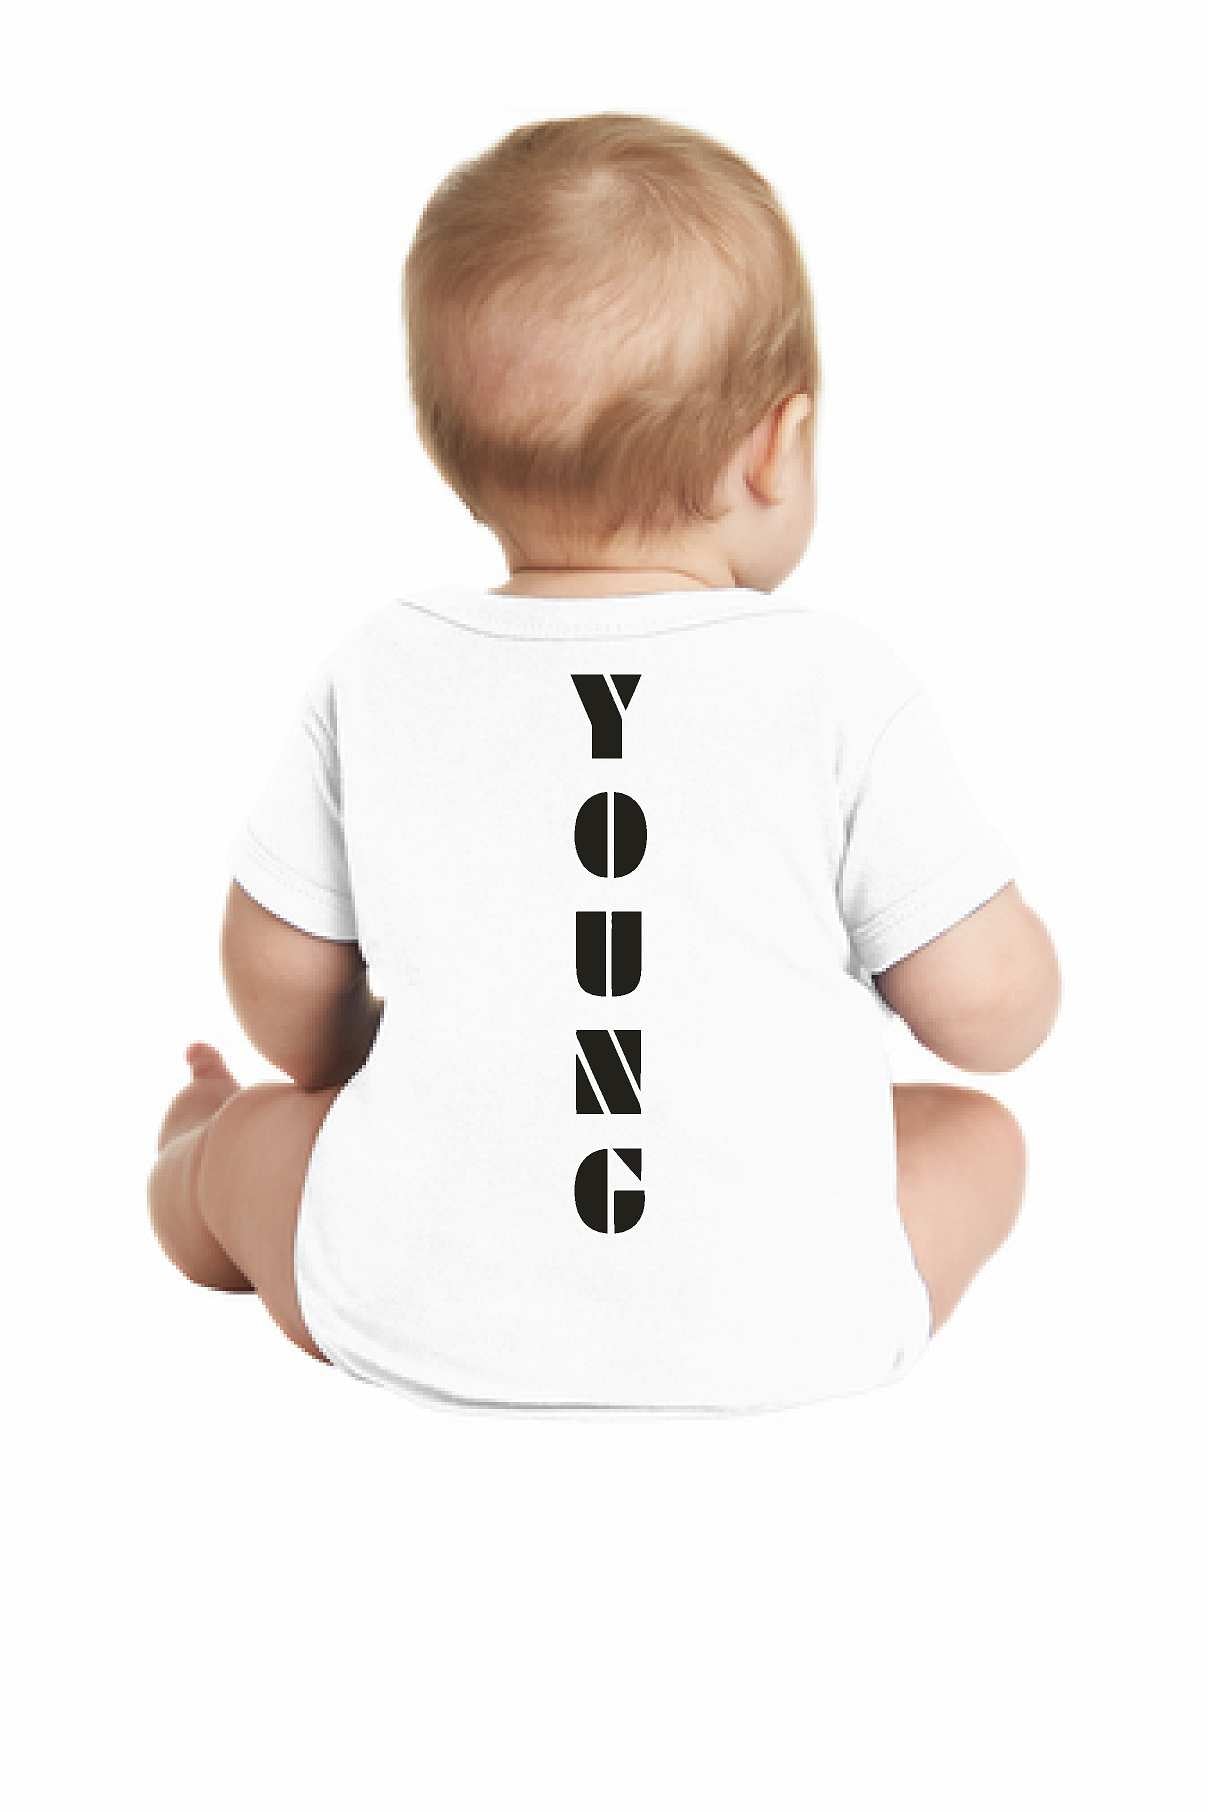 Cole Young Power Slap Baby Onesie  RS4400 Unisex